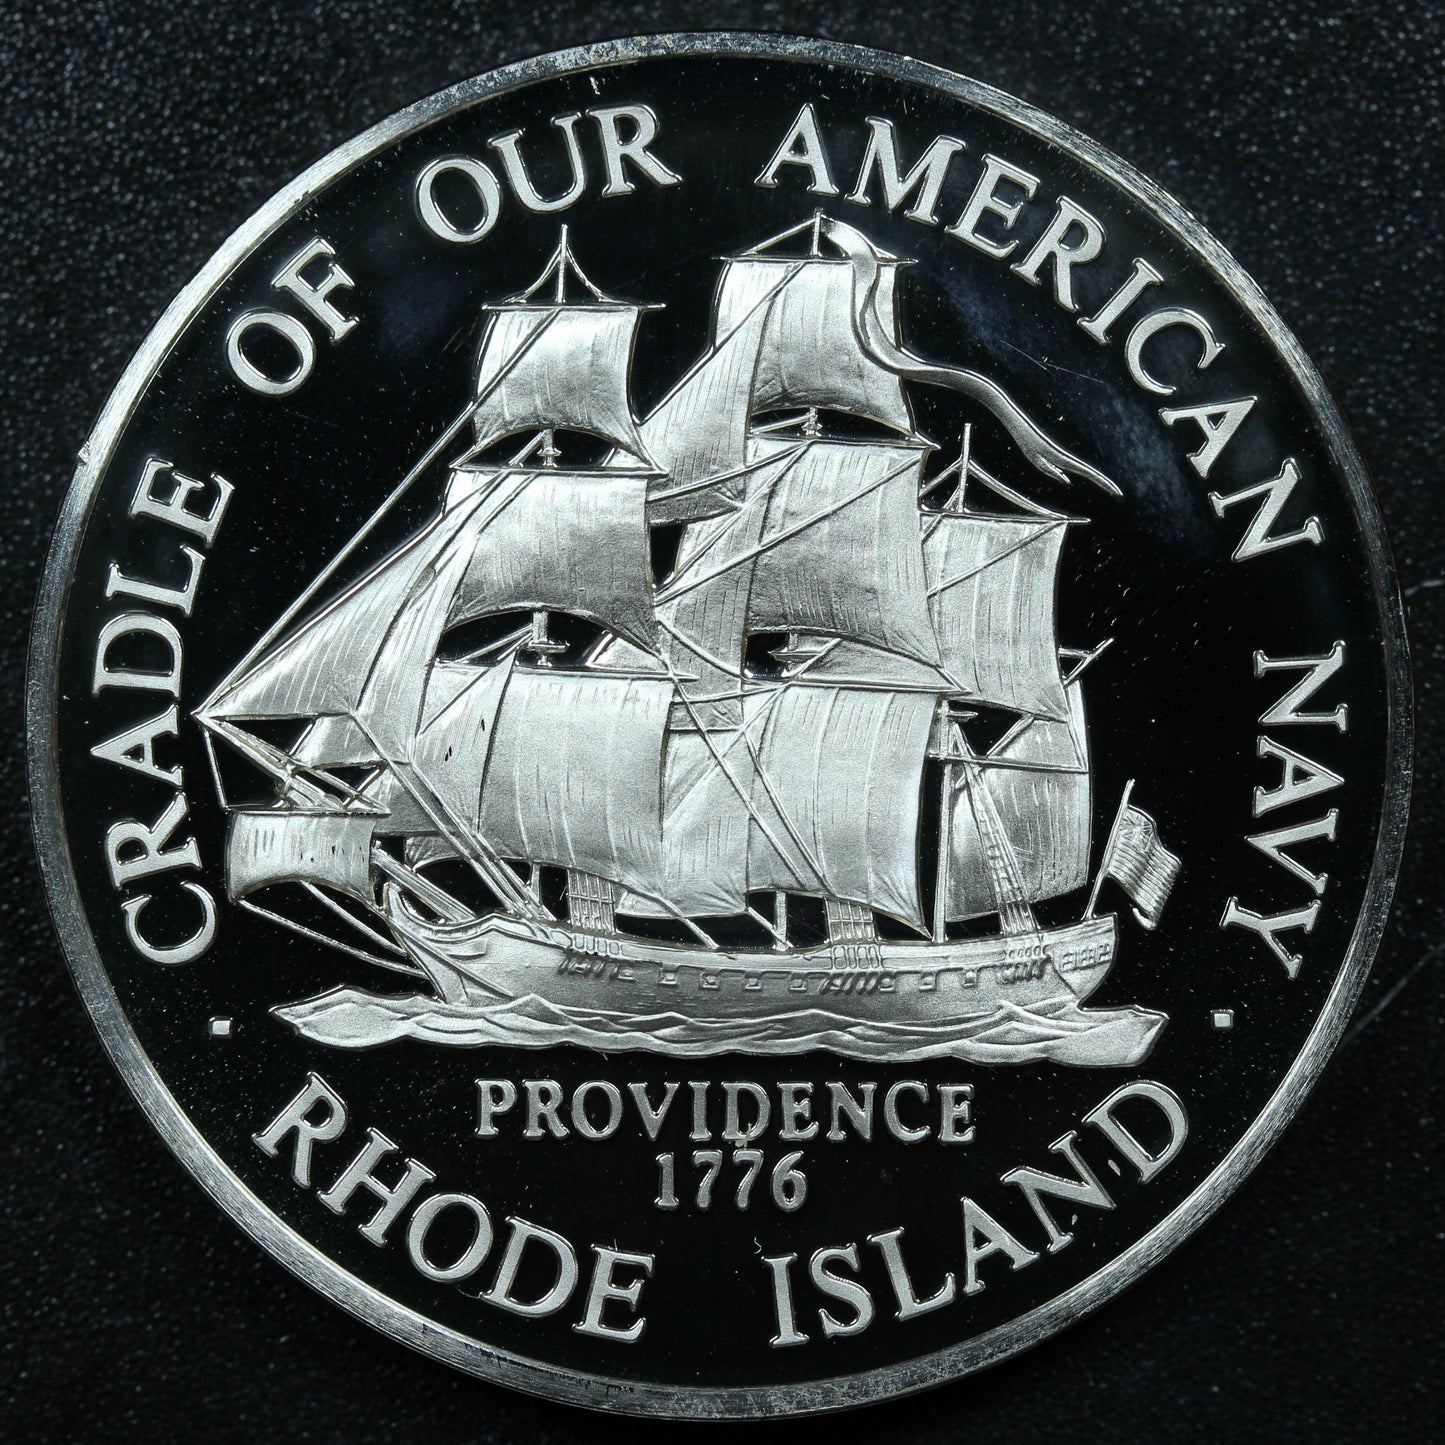 Franklin Mint 50 State Bicentennial Medal - RHODE ISLAND Sterling Silver Proof w/ Capsule